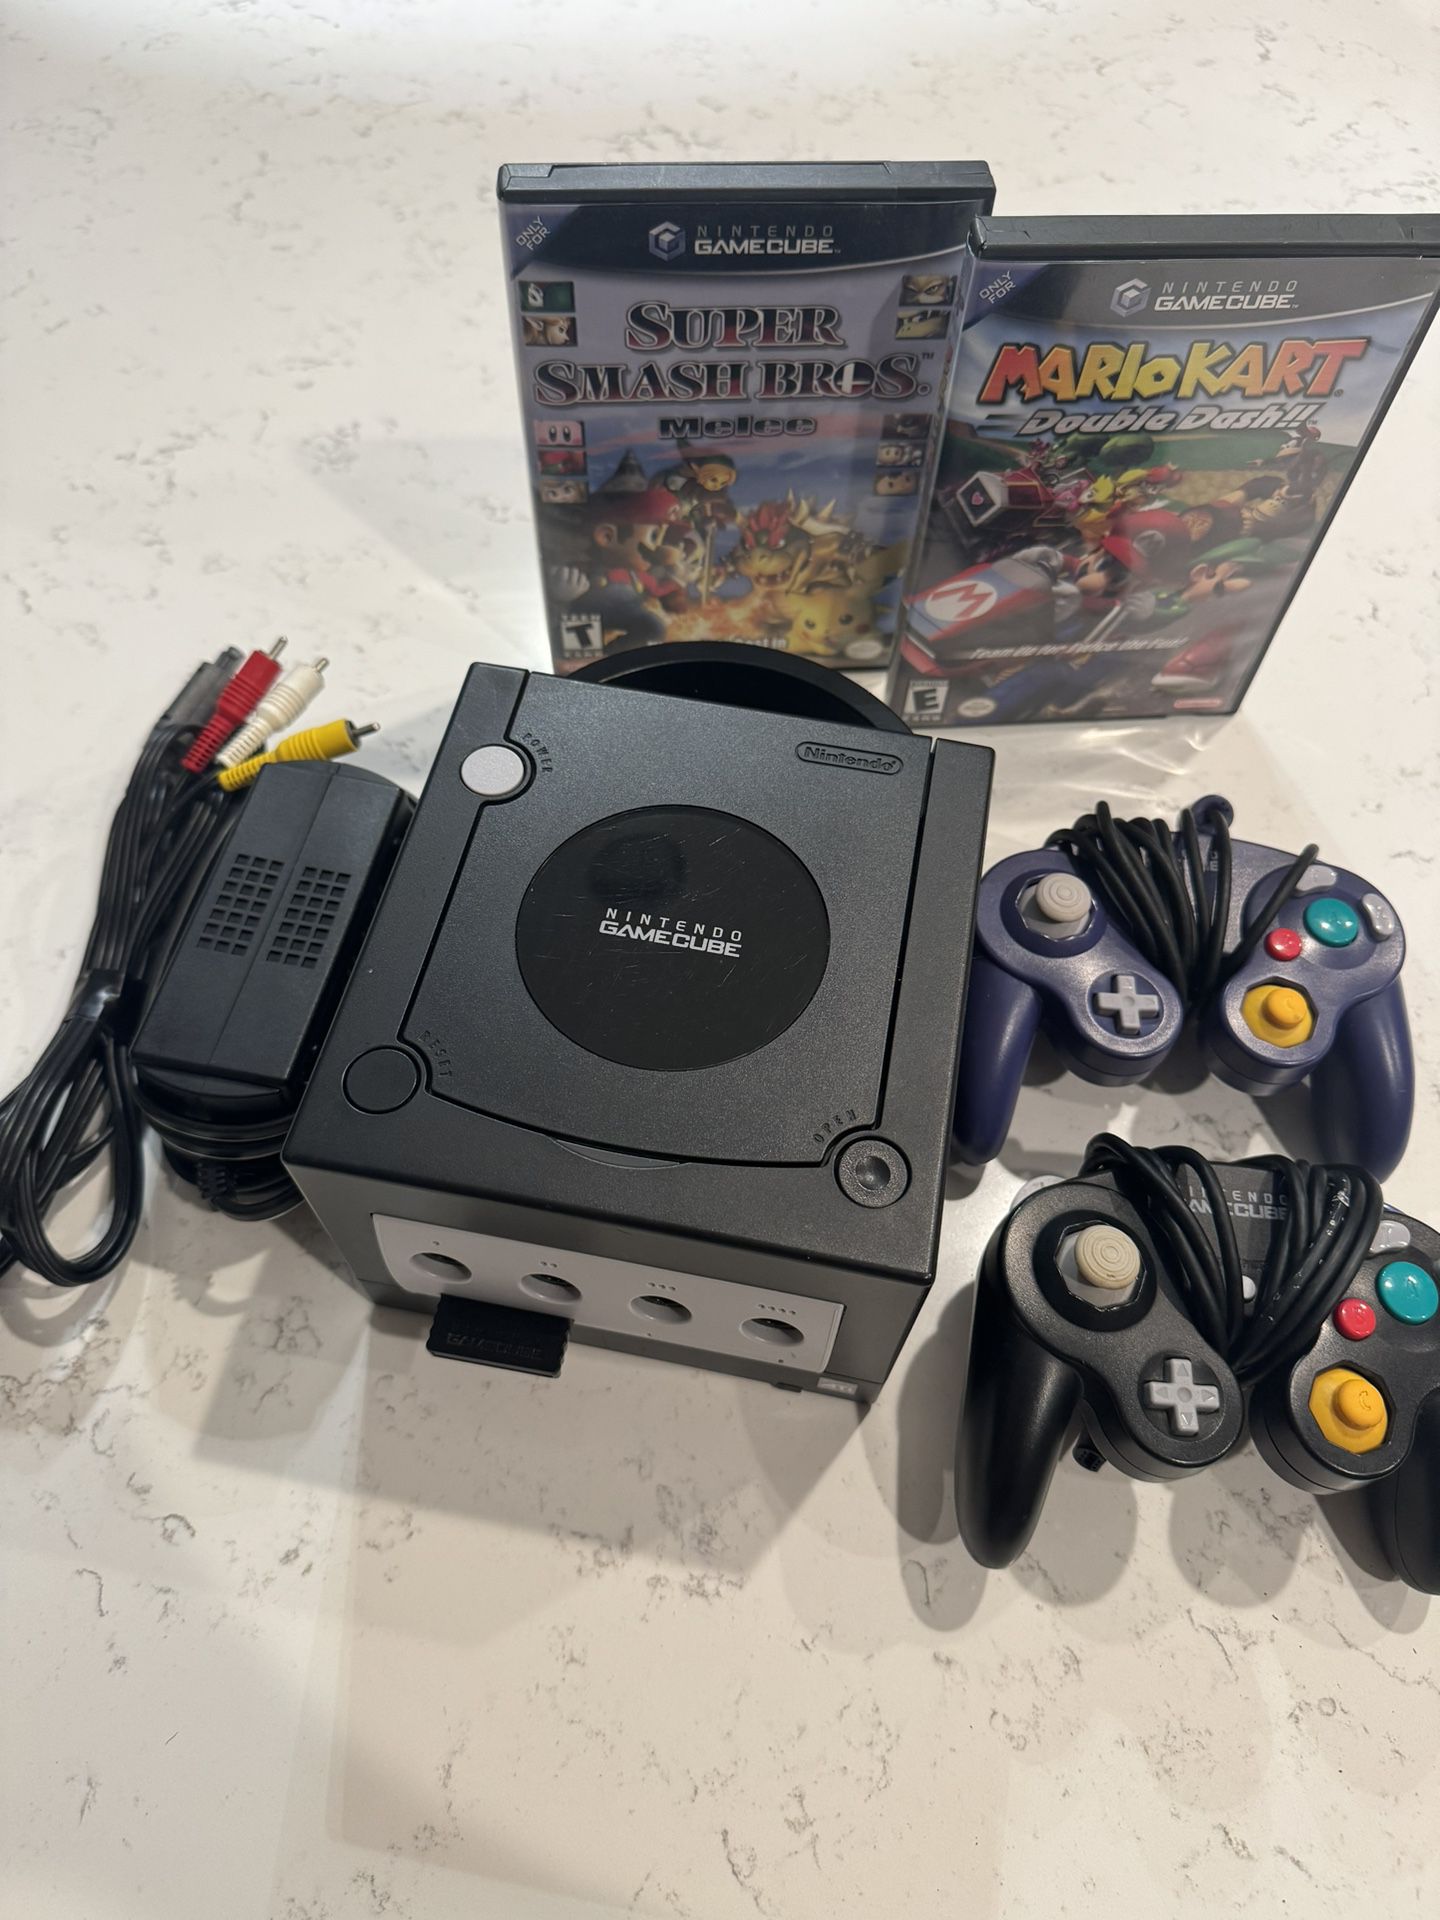 GameCube Bundle Smash Bros & Mario Kart w/ 2 Controllers Included. Great Gift Or Addition To Your Retro Gaming Setup!